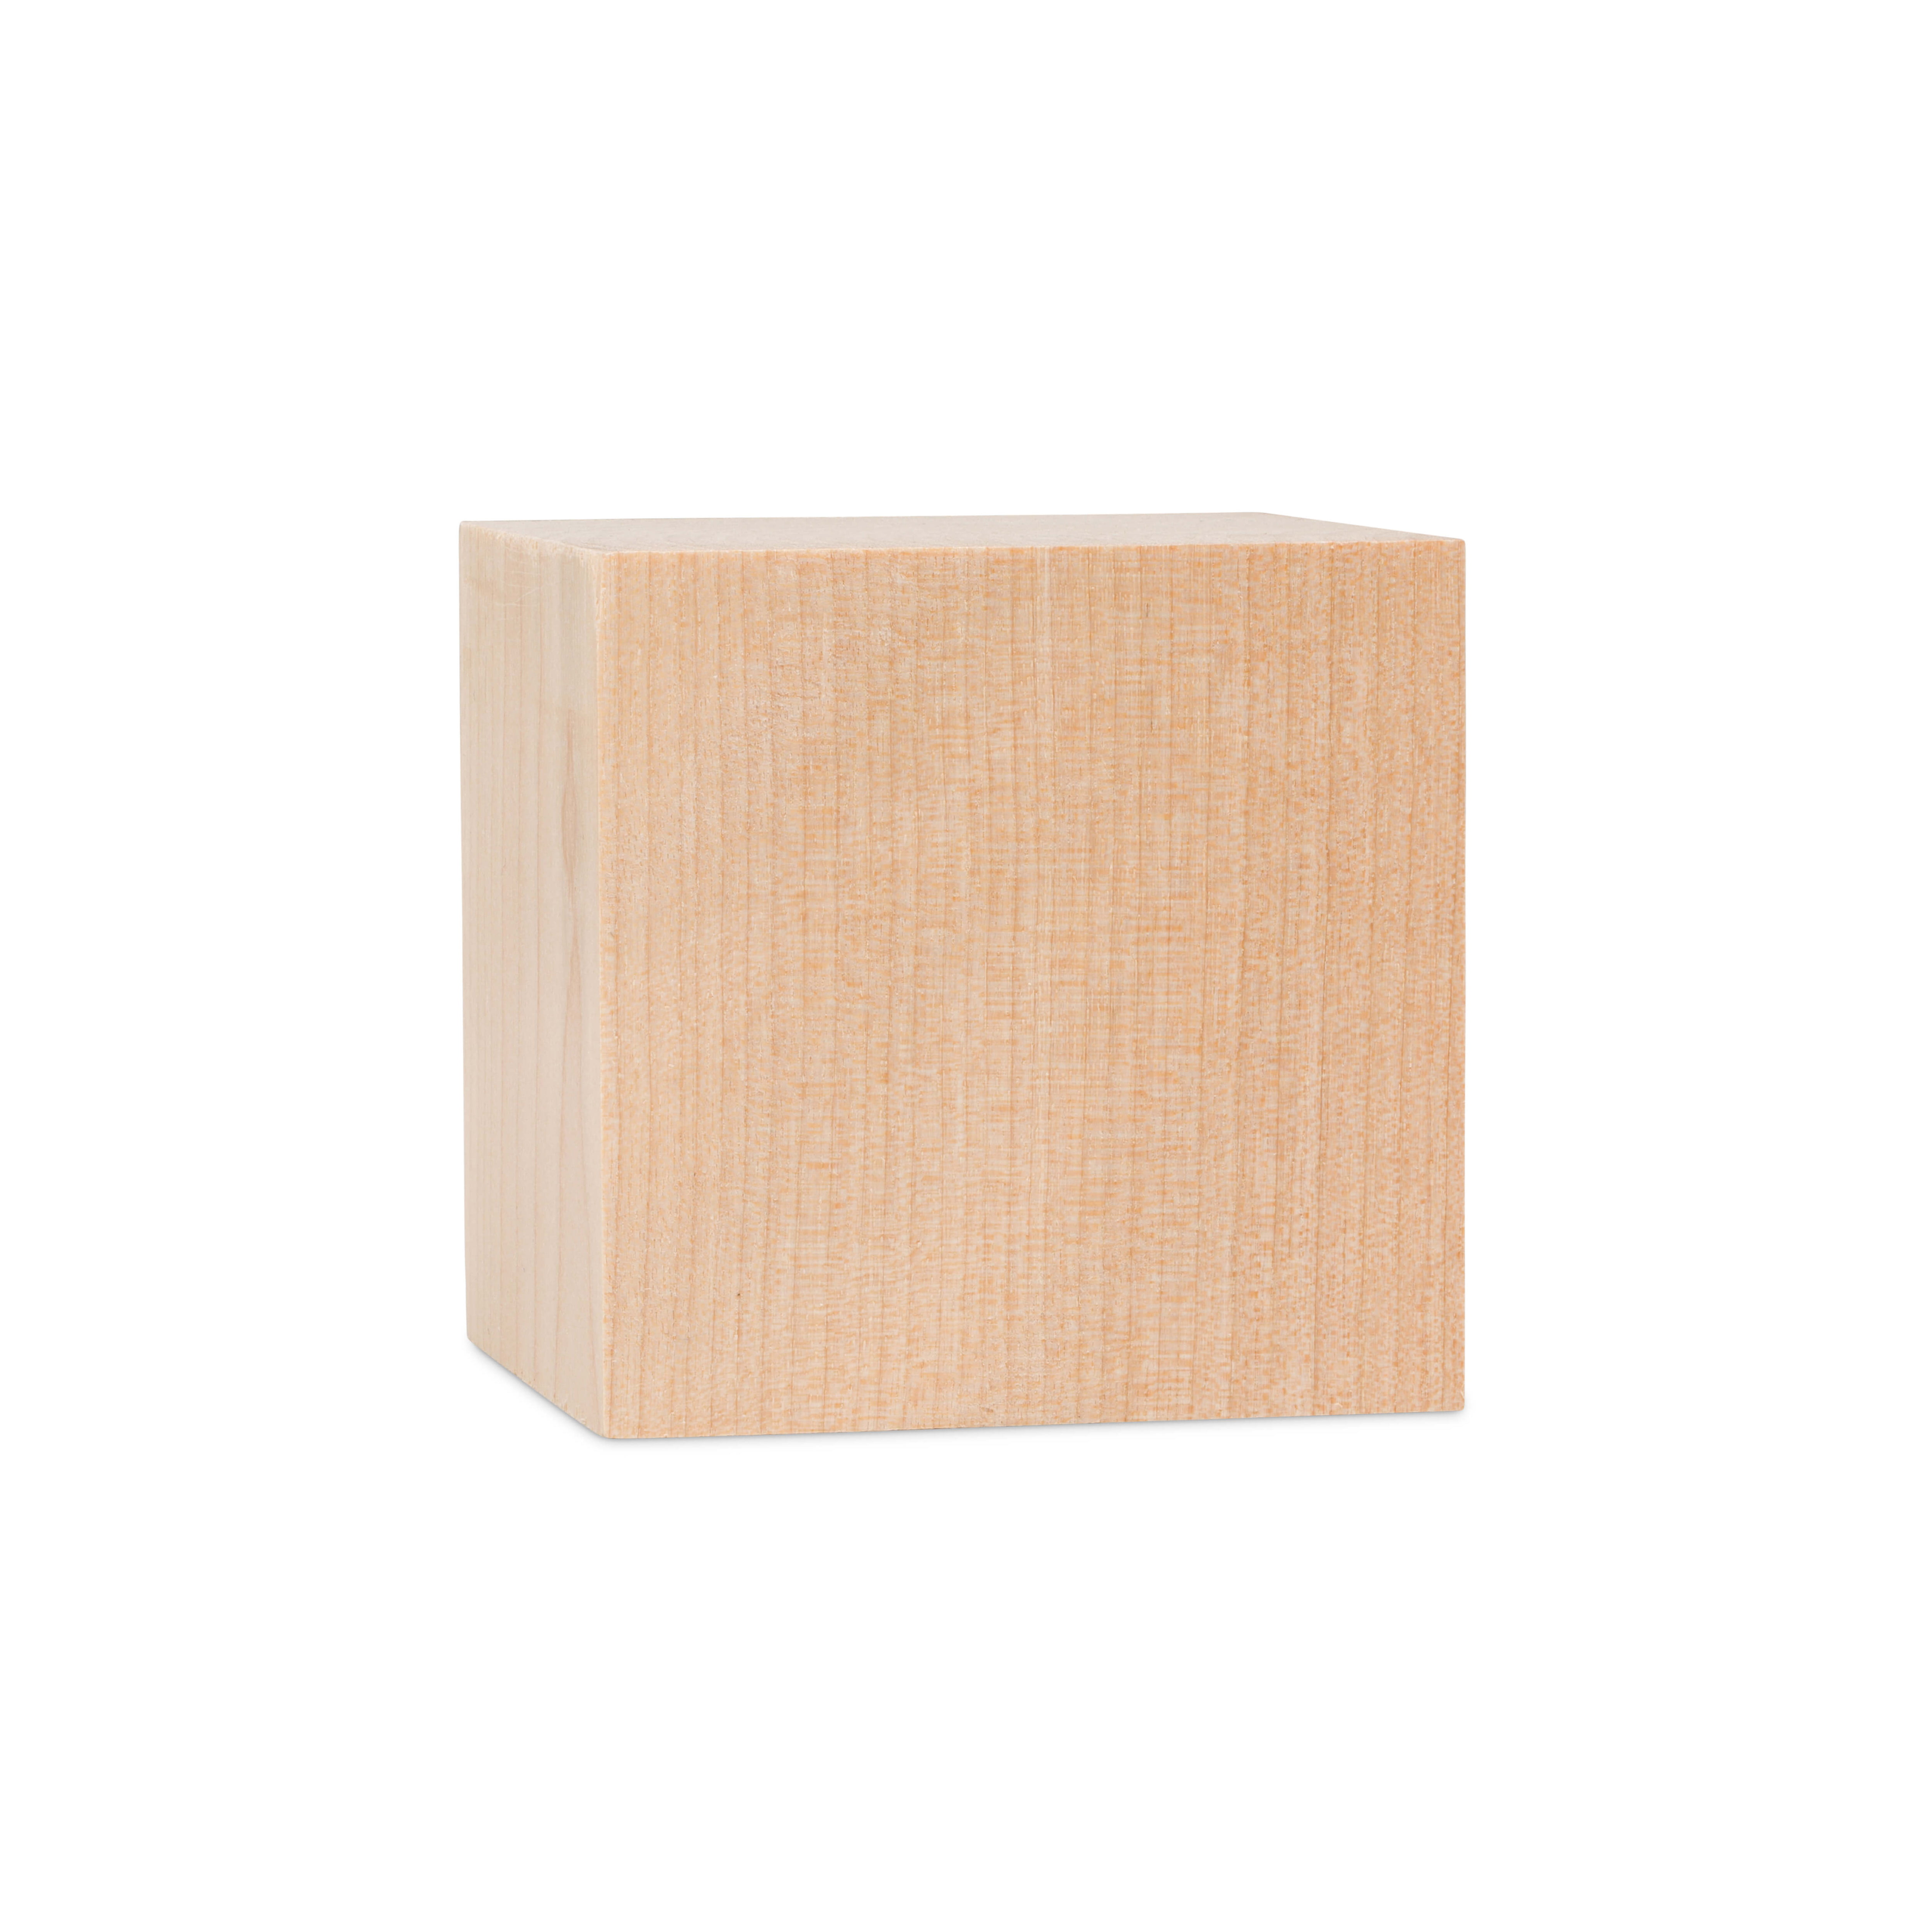 Wooden Cubes 1-1/2 - by Craftparts Direct Crafts & DIY Projects Bag of 24 1-1/2 Inch Wood Square Blocks For Photo Blocks 